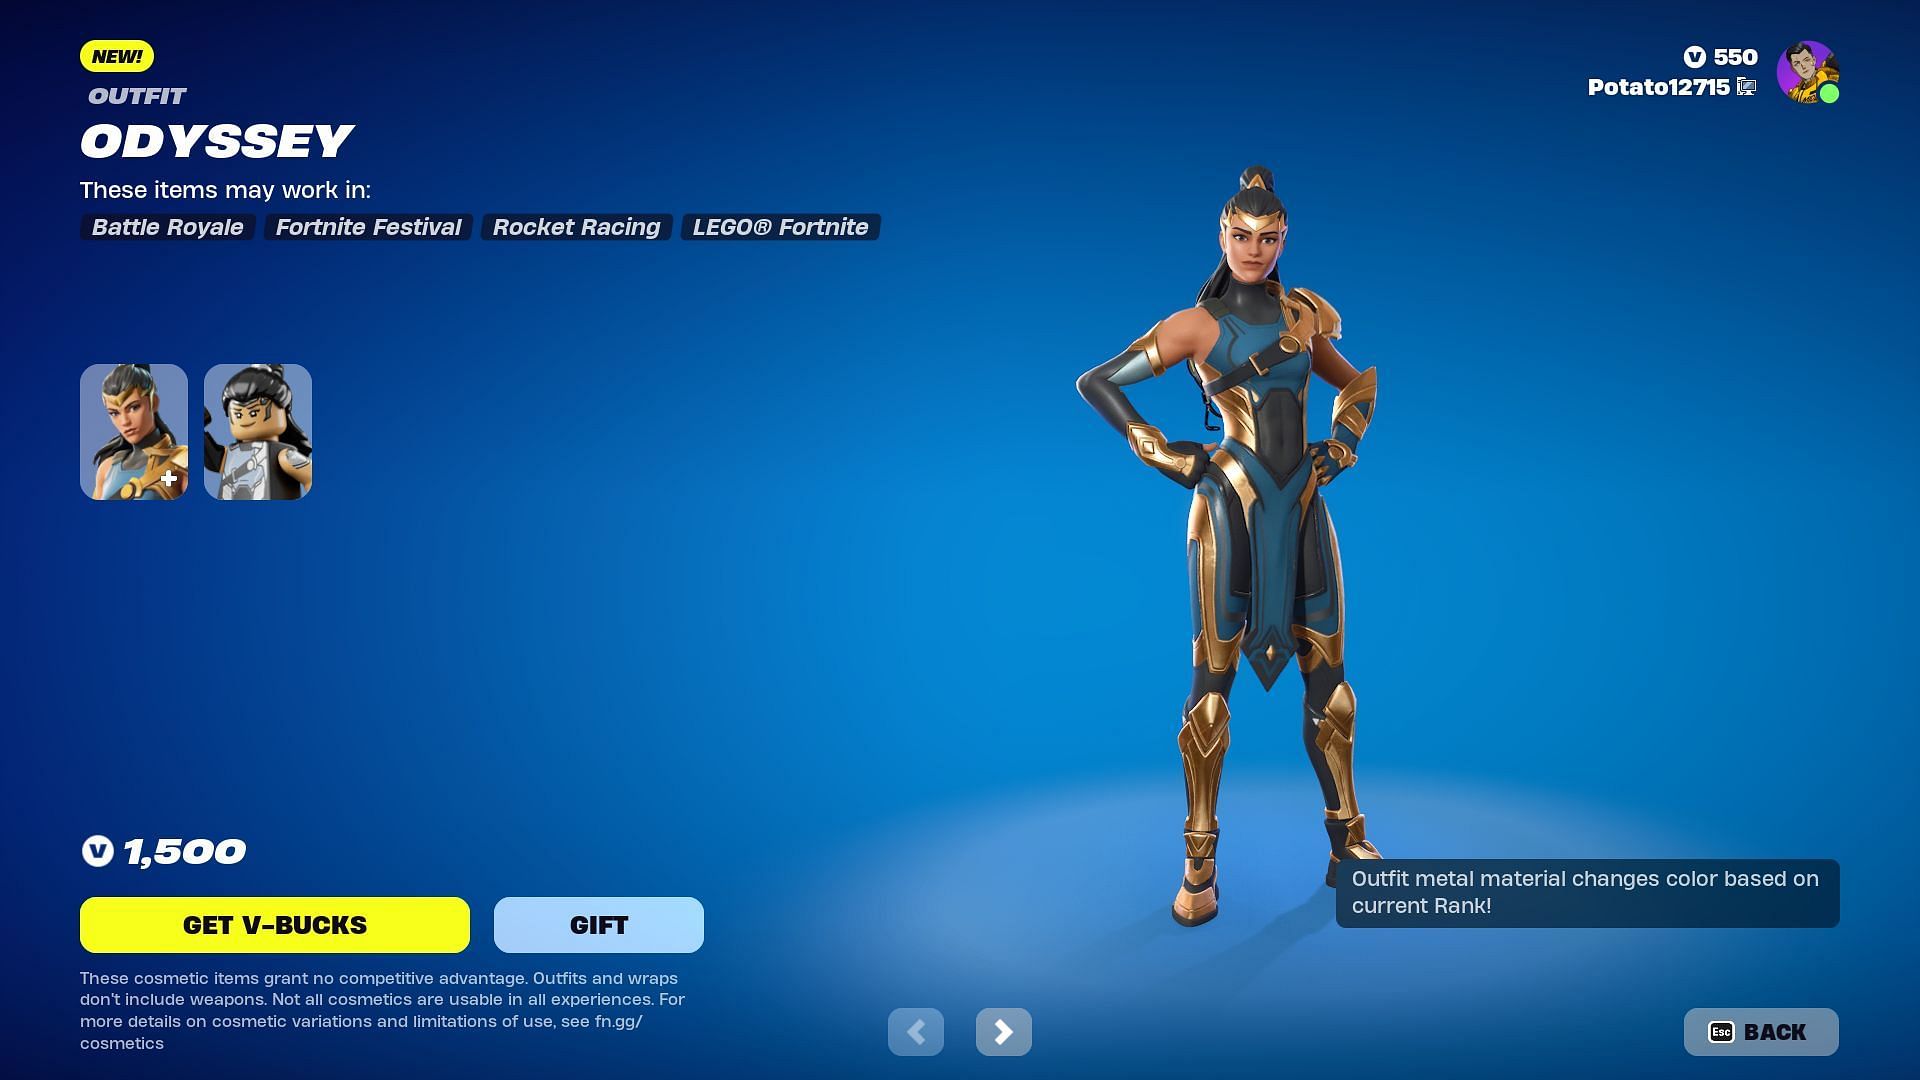 The Ageless Odyssey Set is currently listed in the Item Shop (Image via Epic Games)